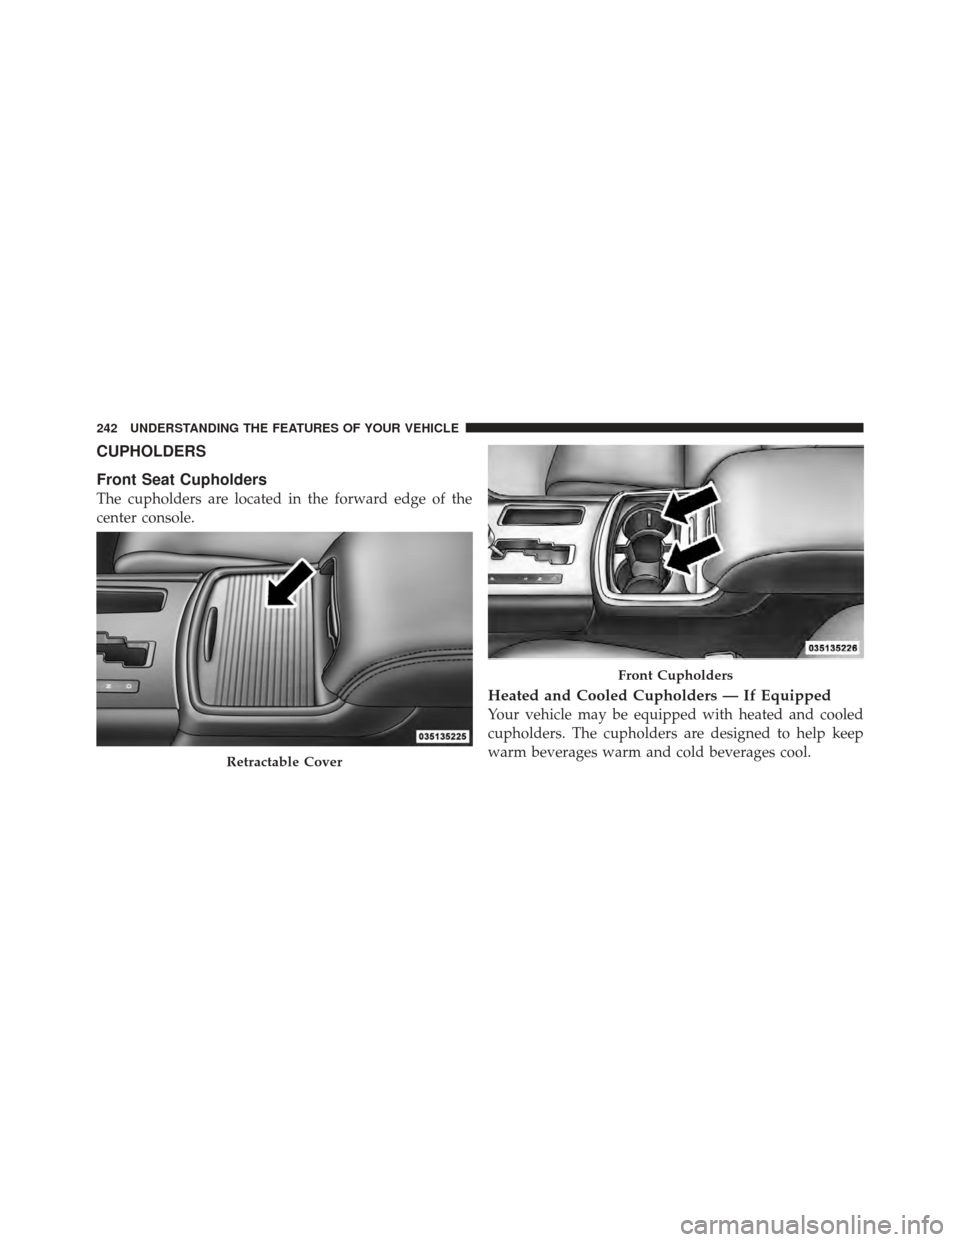 CHRYSLER 300 2011 2.G Owners Manual CUPHOLDERS
Front Seat Cupholders
The cupholders are located in the forward edge of the
center console.
Heated and Cooled Cupholders — If Equipped
Your vehicle may be equipped with heated and cooled
